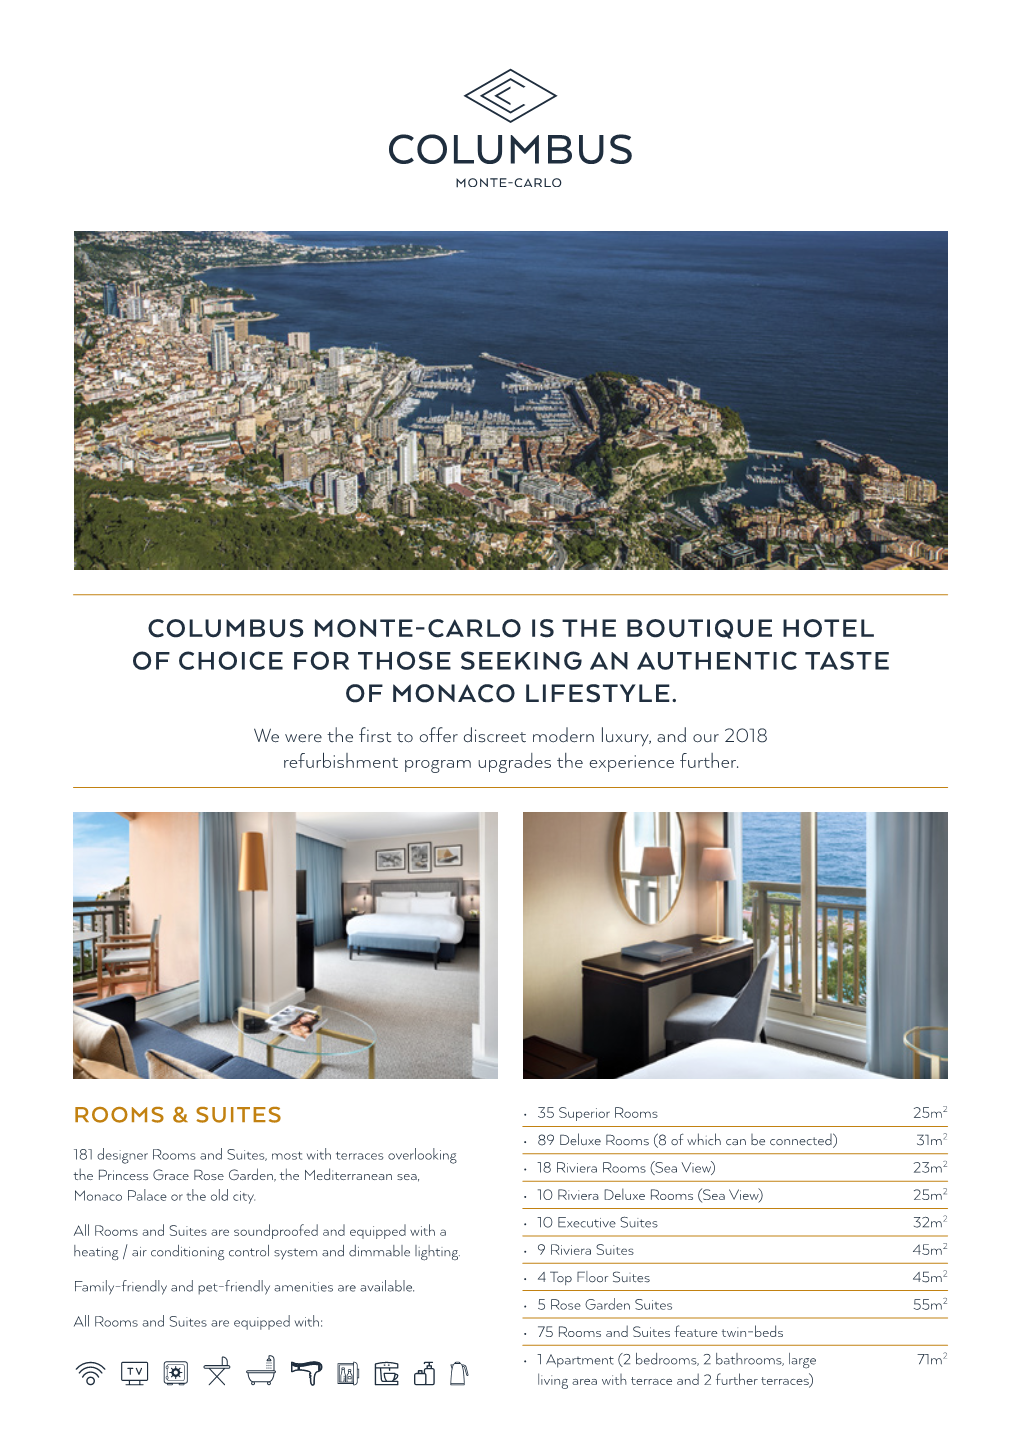 Columbus Monte-Carlo Is the Boutique Hotel of Choice for Those Seeking an Authentic Taste of Monaco Lifestyle